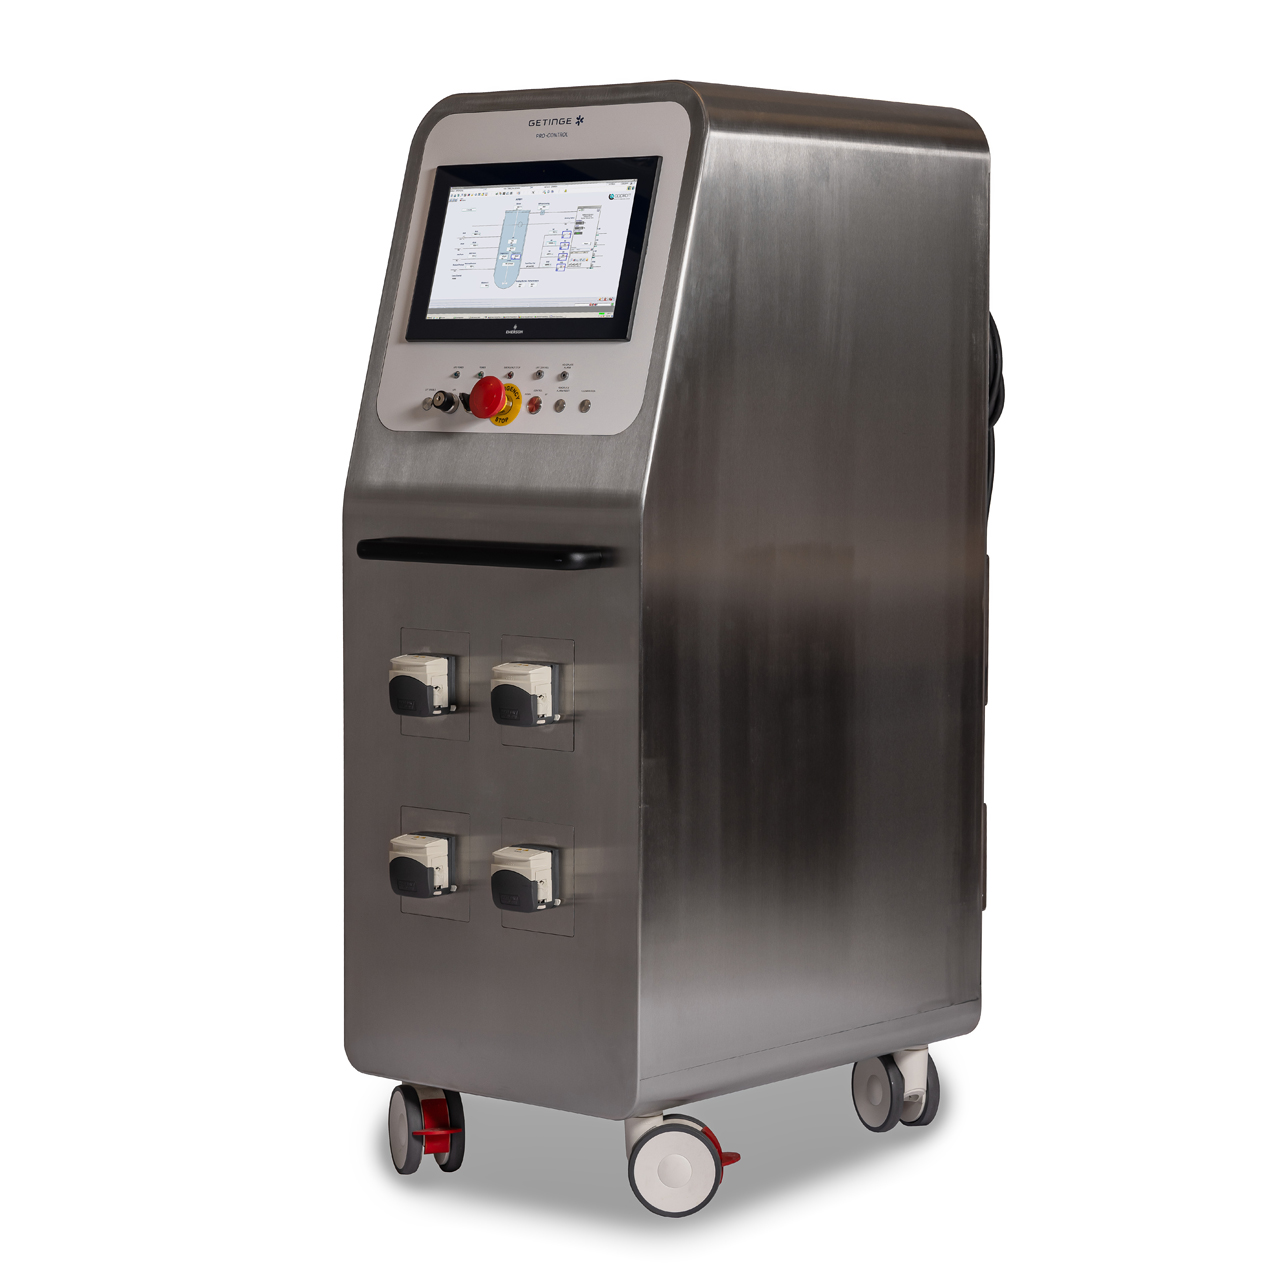 The Pro-Cotrol is ideal for bioprocess control in pilot and production